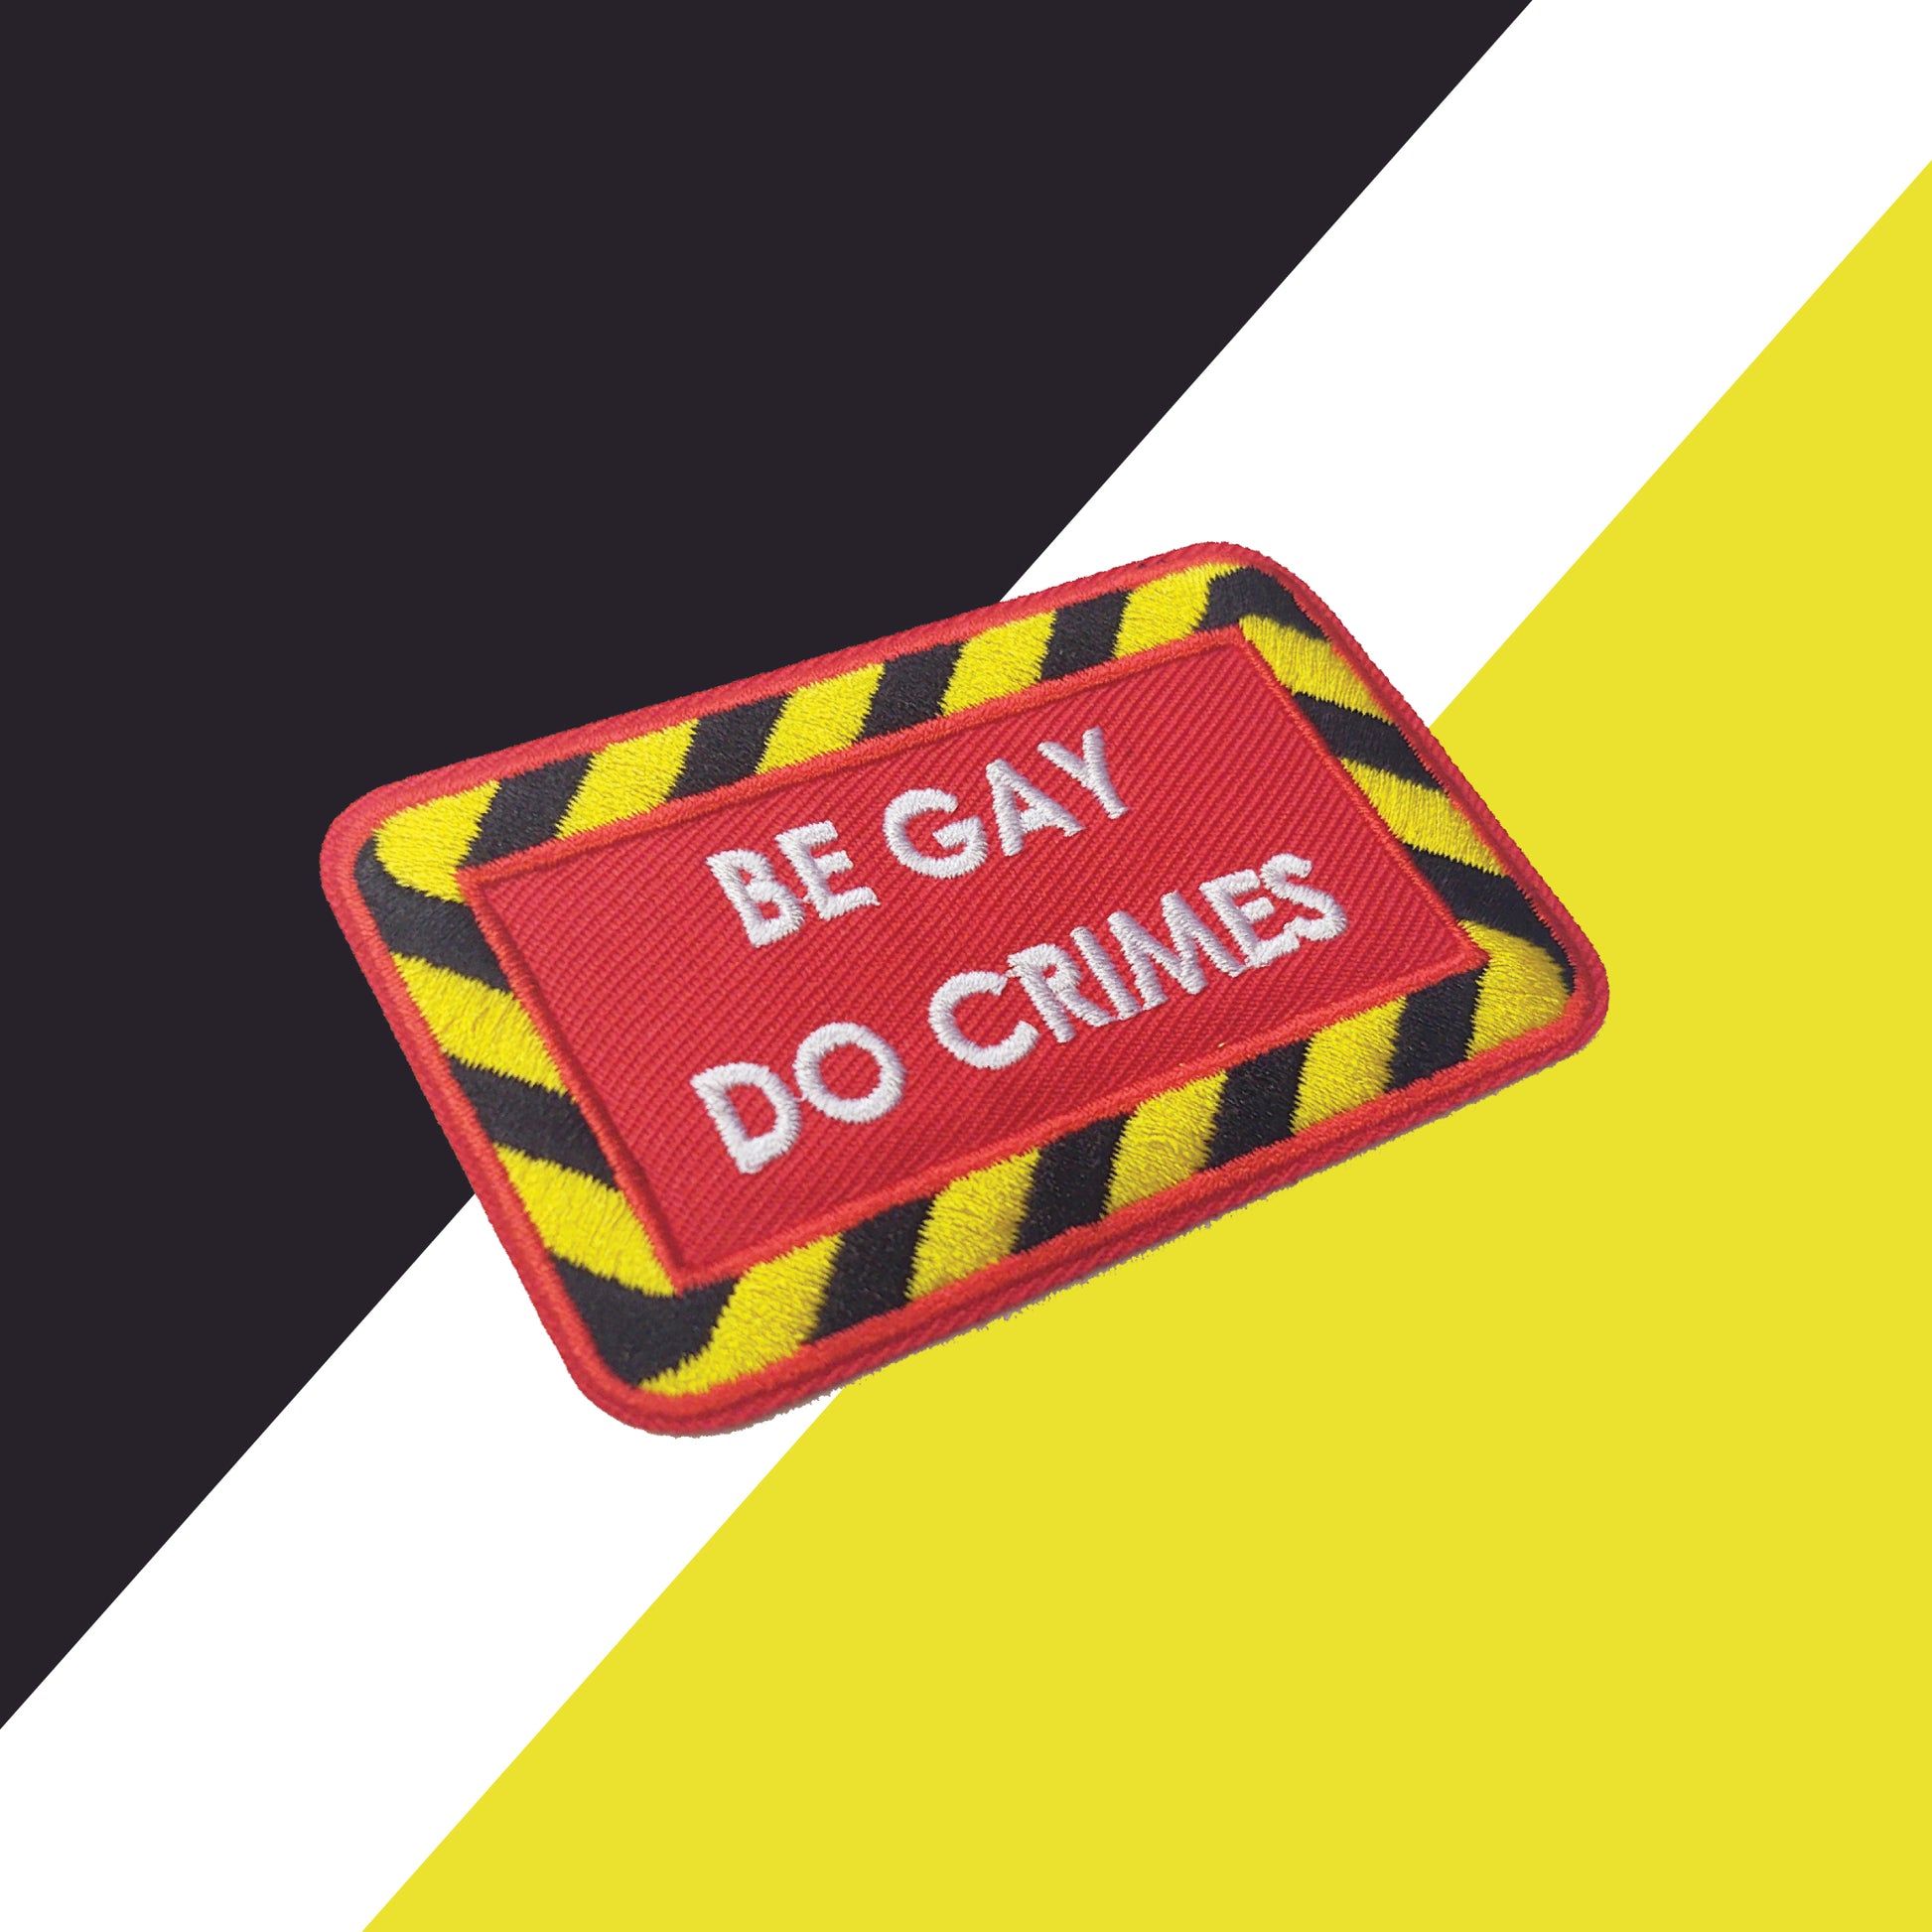 red iron-on patch set at an angle with a black and yellow striped border and white text "be gay do crimes". The background is black, white, and yellow shapes.